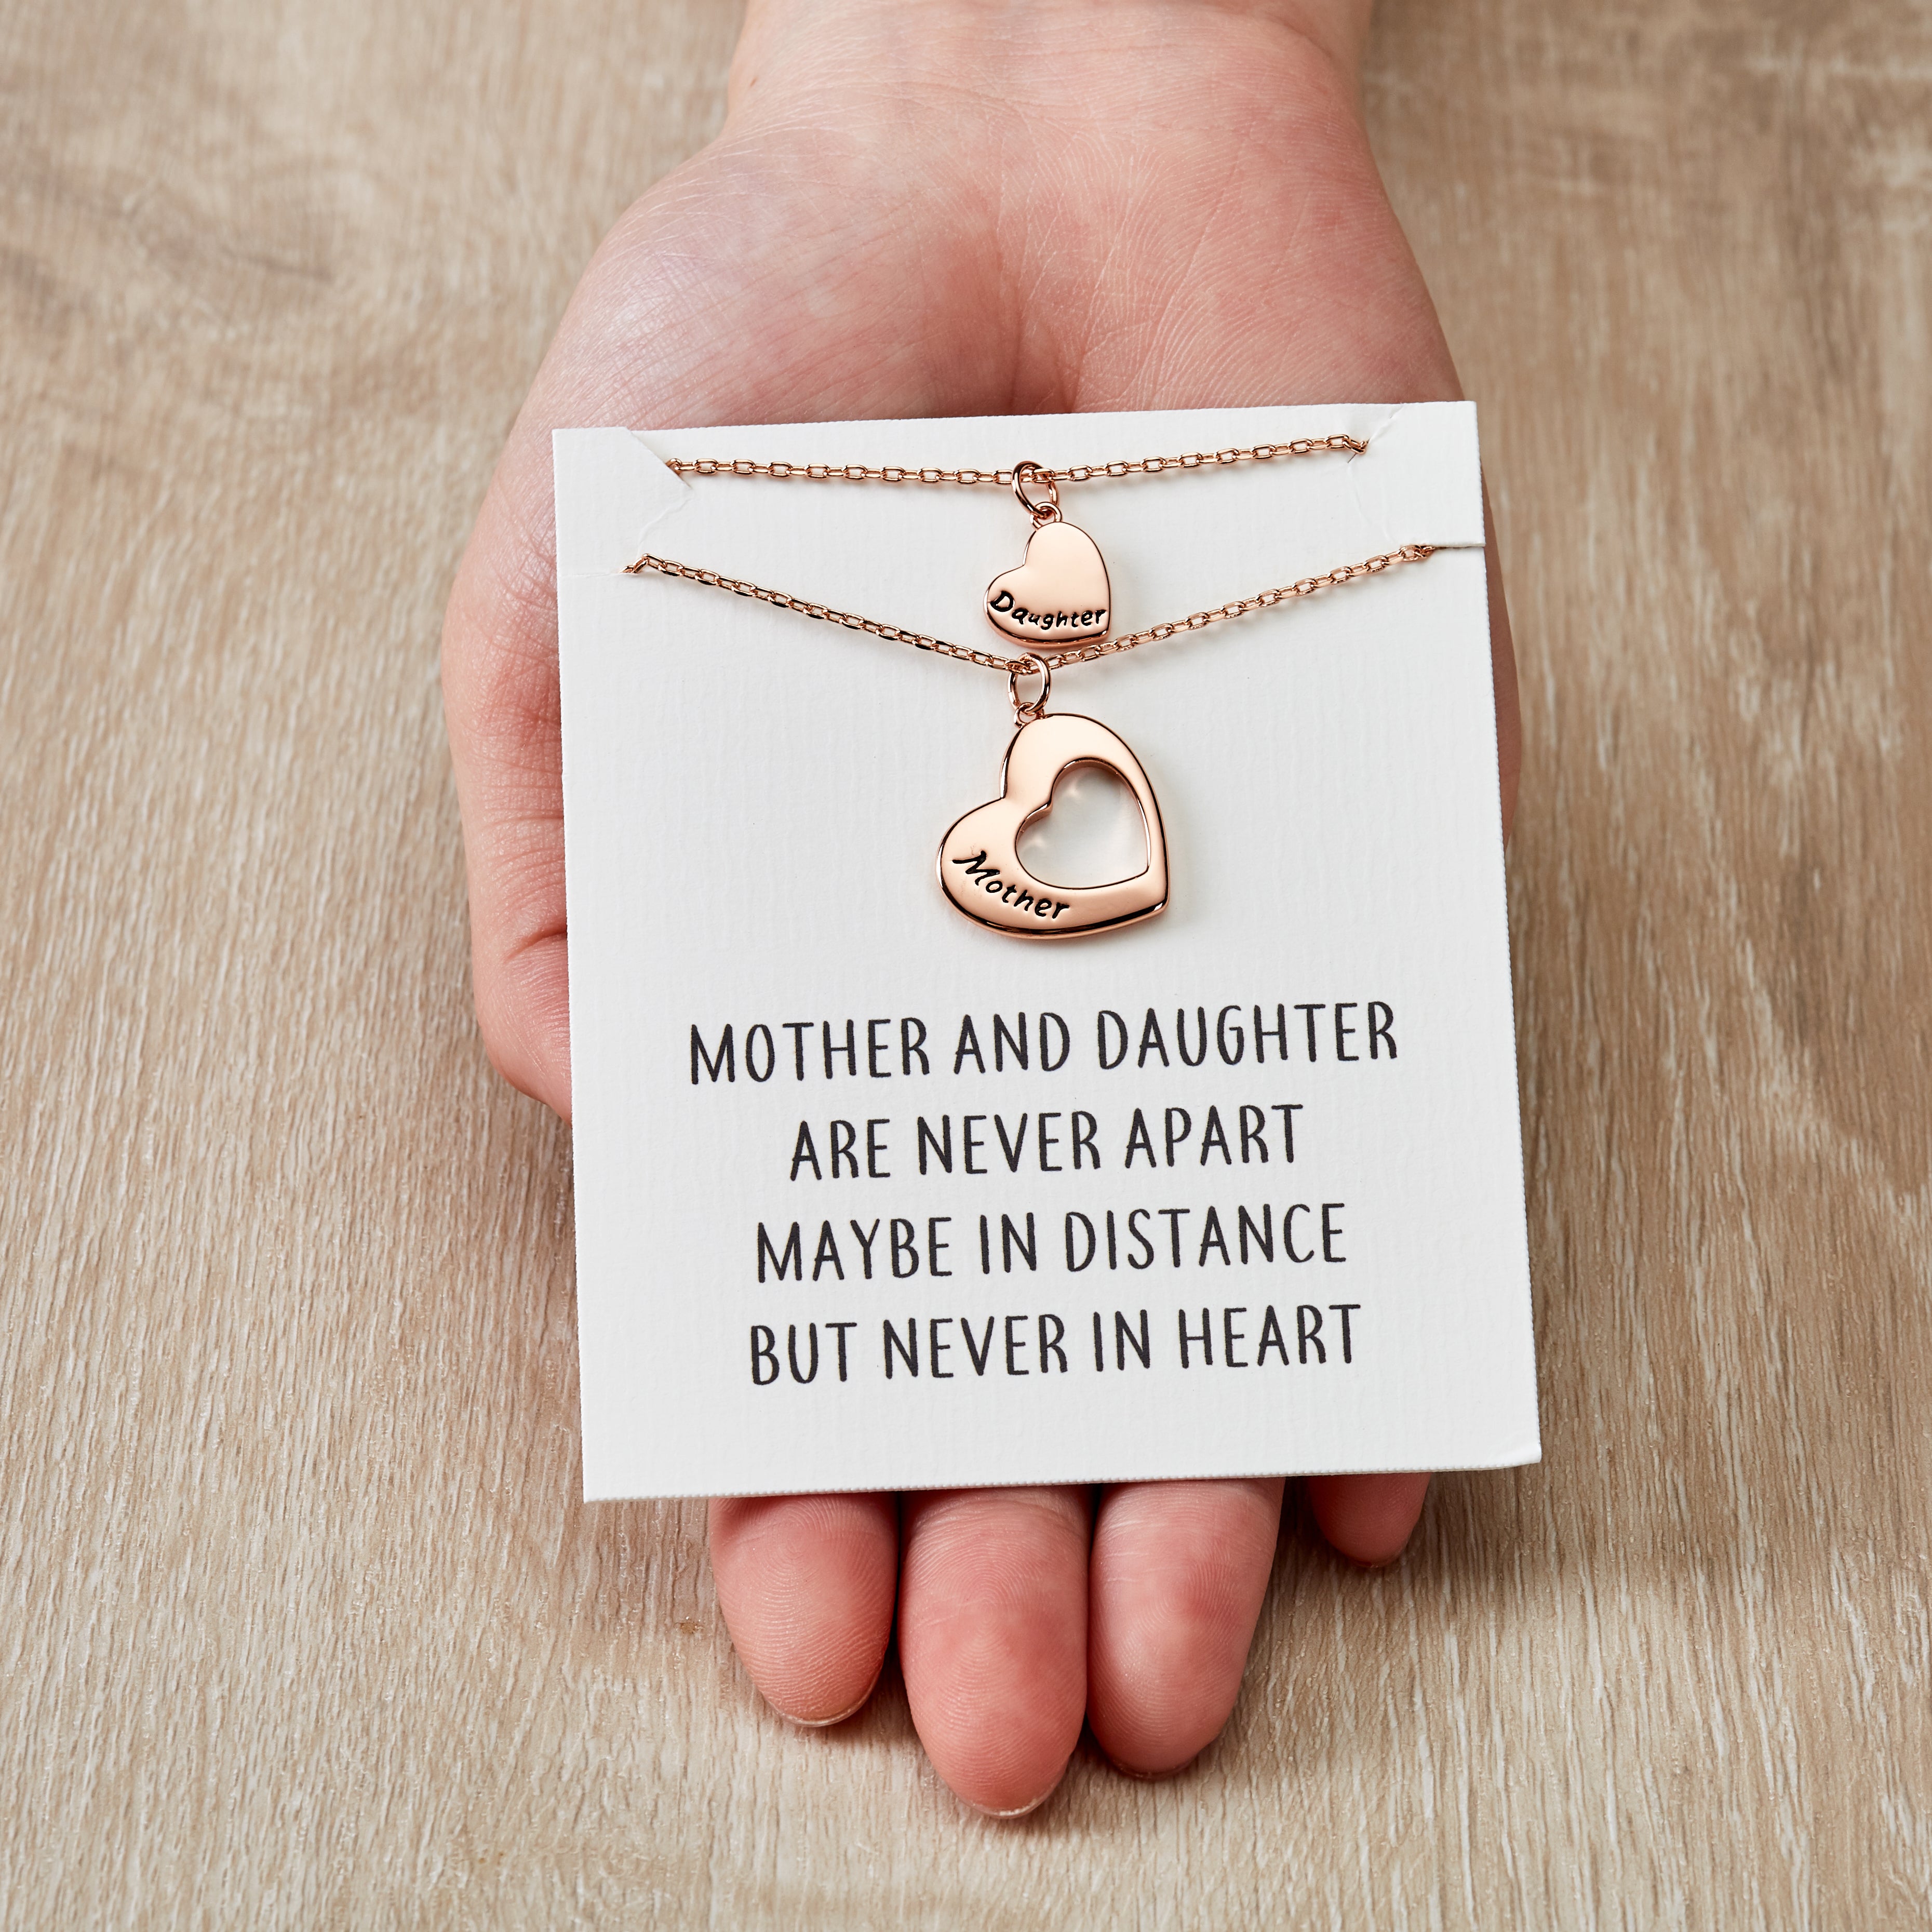 Rose Gold Plated Mother and Daughter Necklace Set with Quote Card